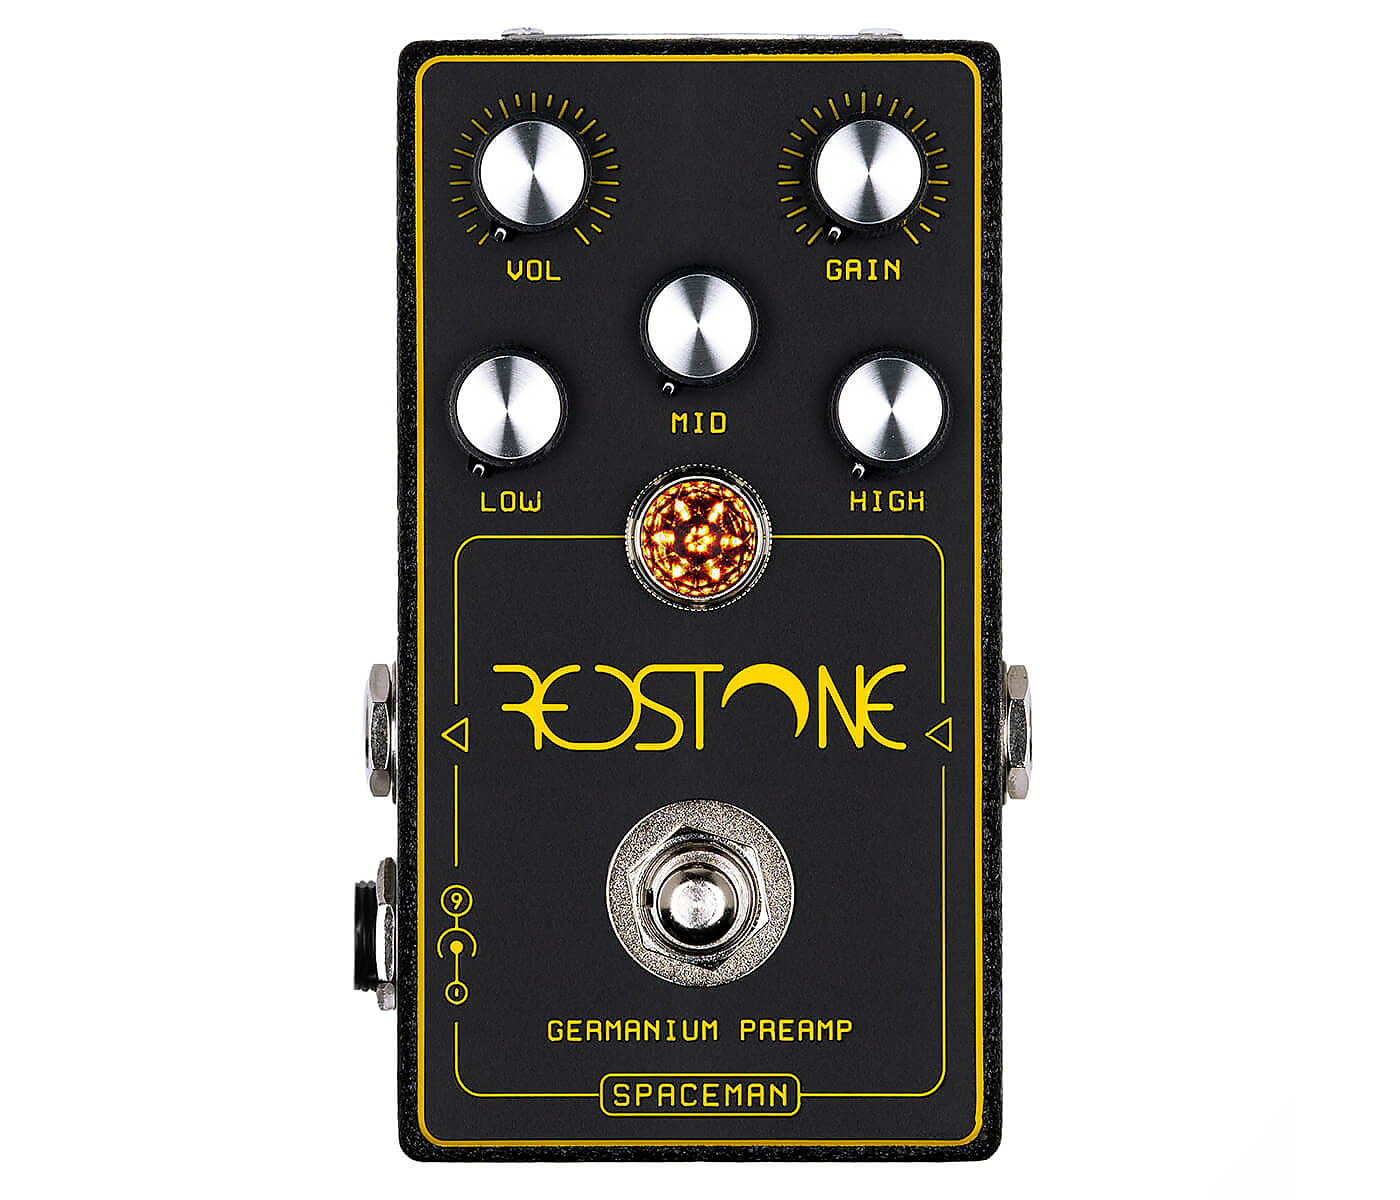 Spaceman Redstone Standard /// CARBONADO Preamp Effects Pedal